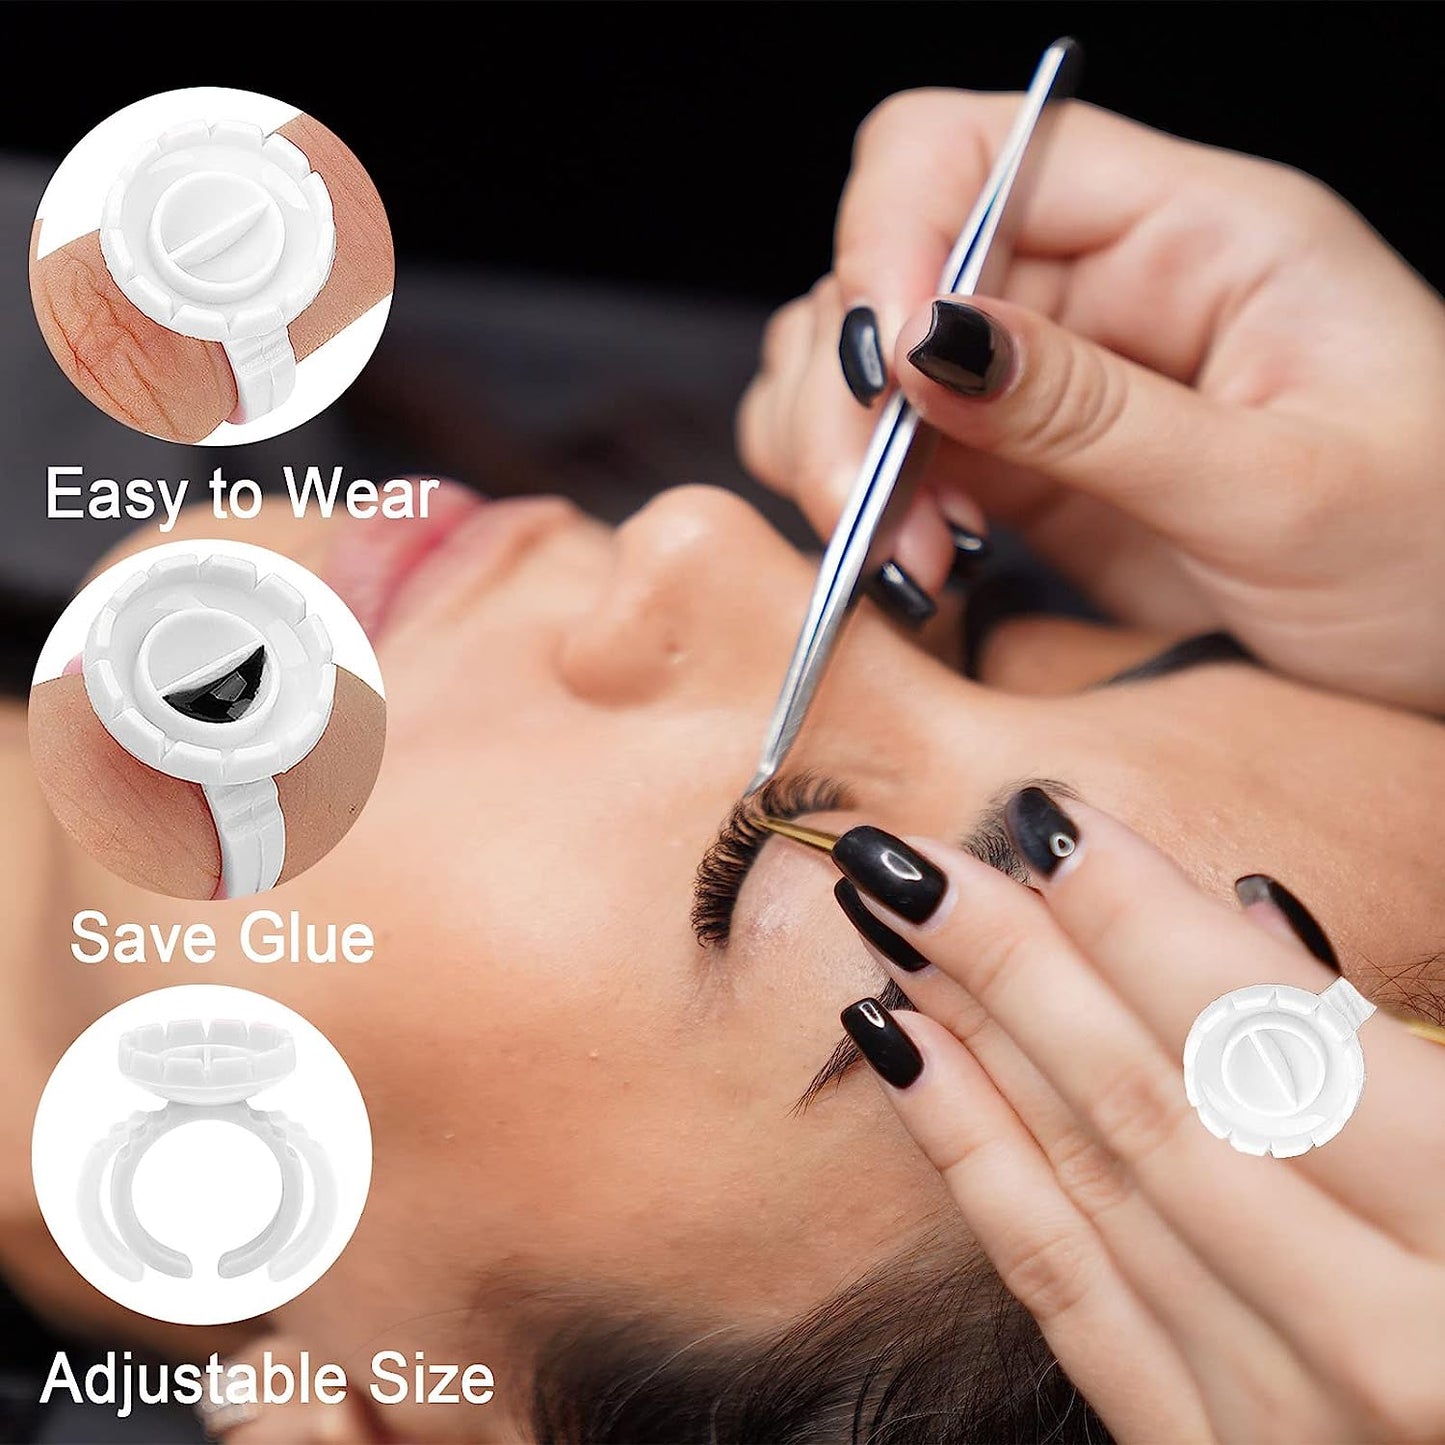 Disposable Glue/Pigment Ring Cup With 2 Slots And V-Shaped Base - White Lash Extension Accessories